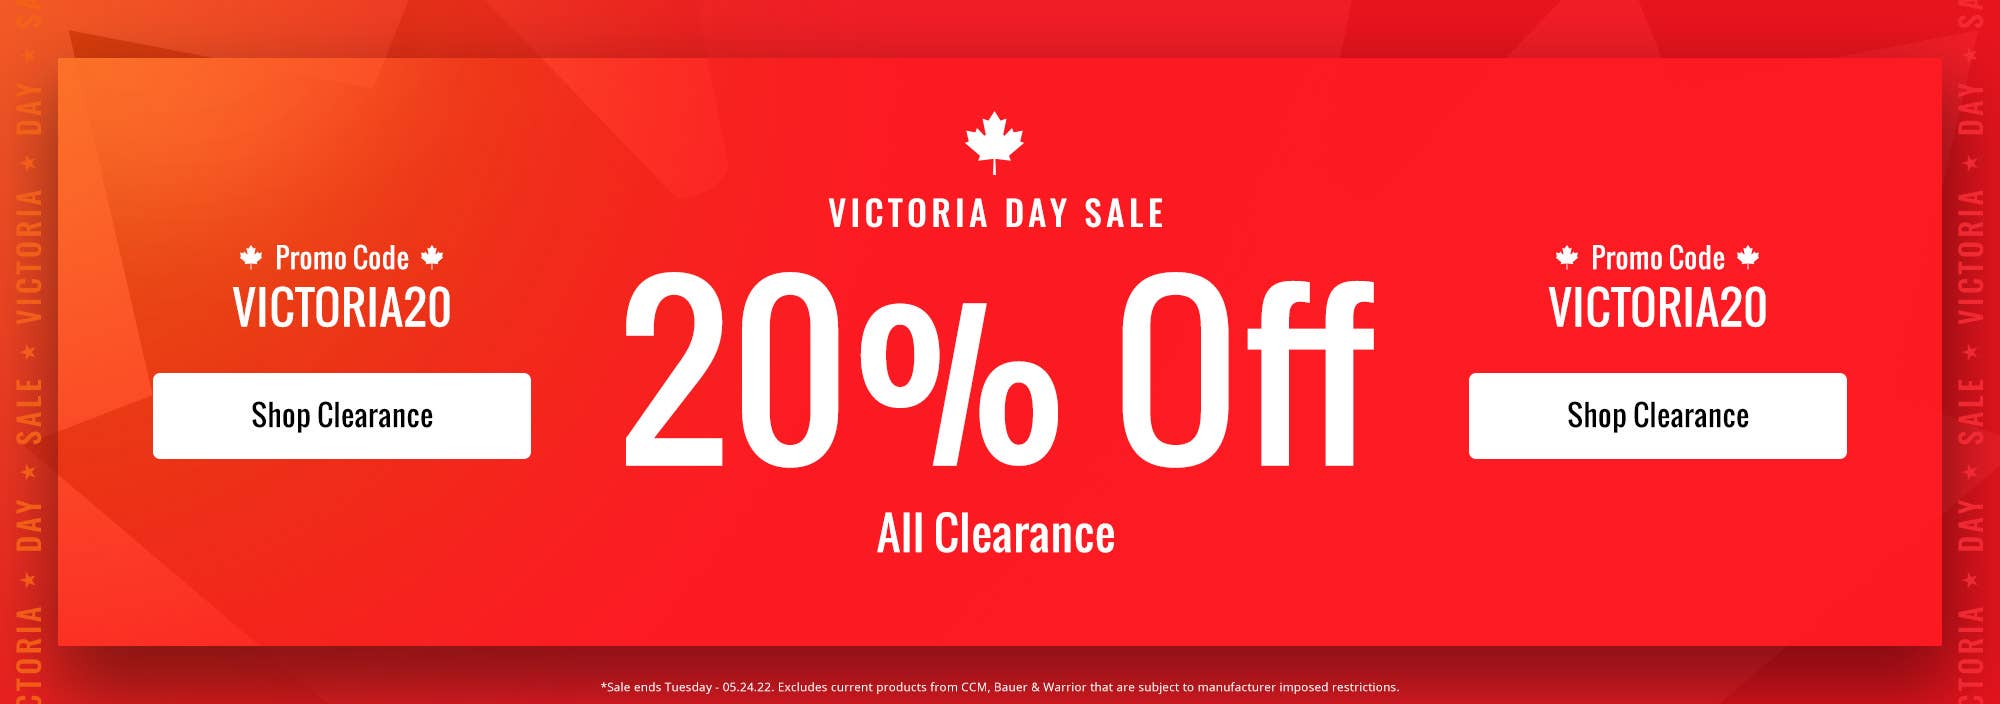 Victoria Day Sale: 20% Off Clearance